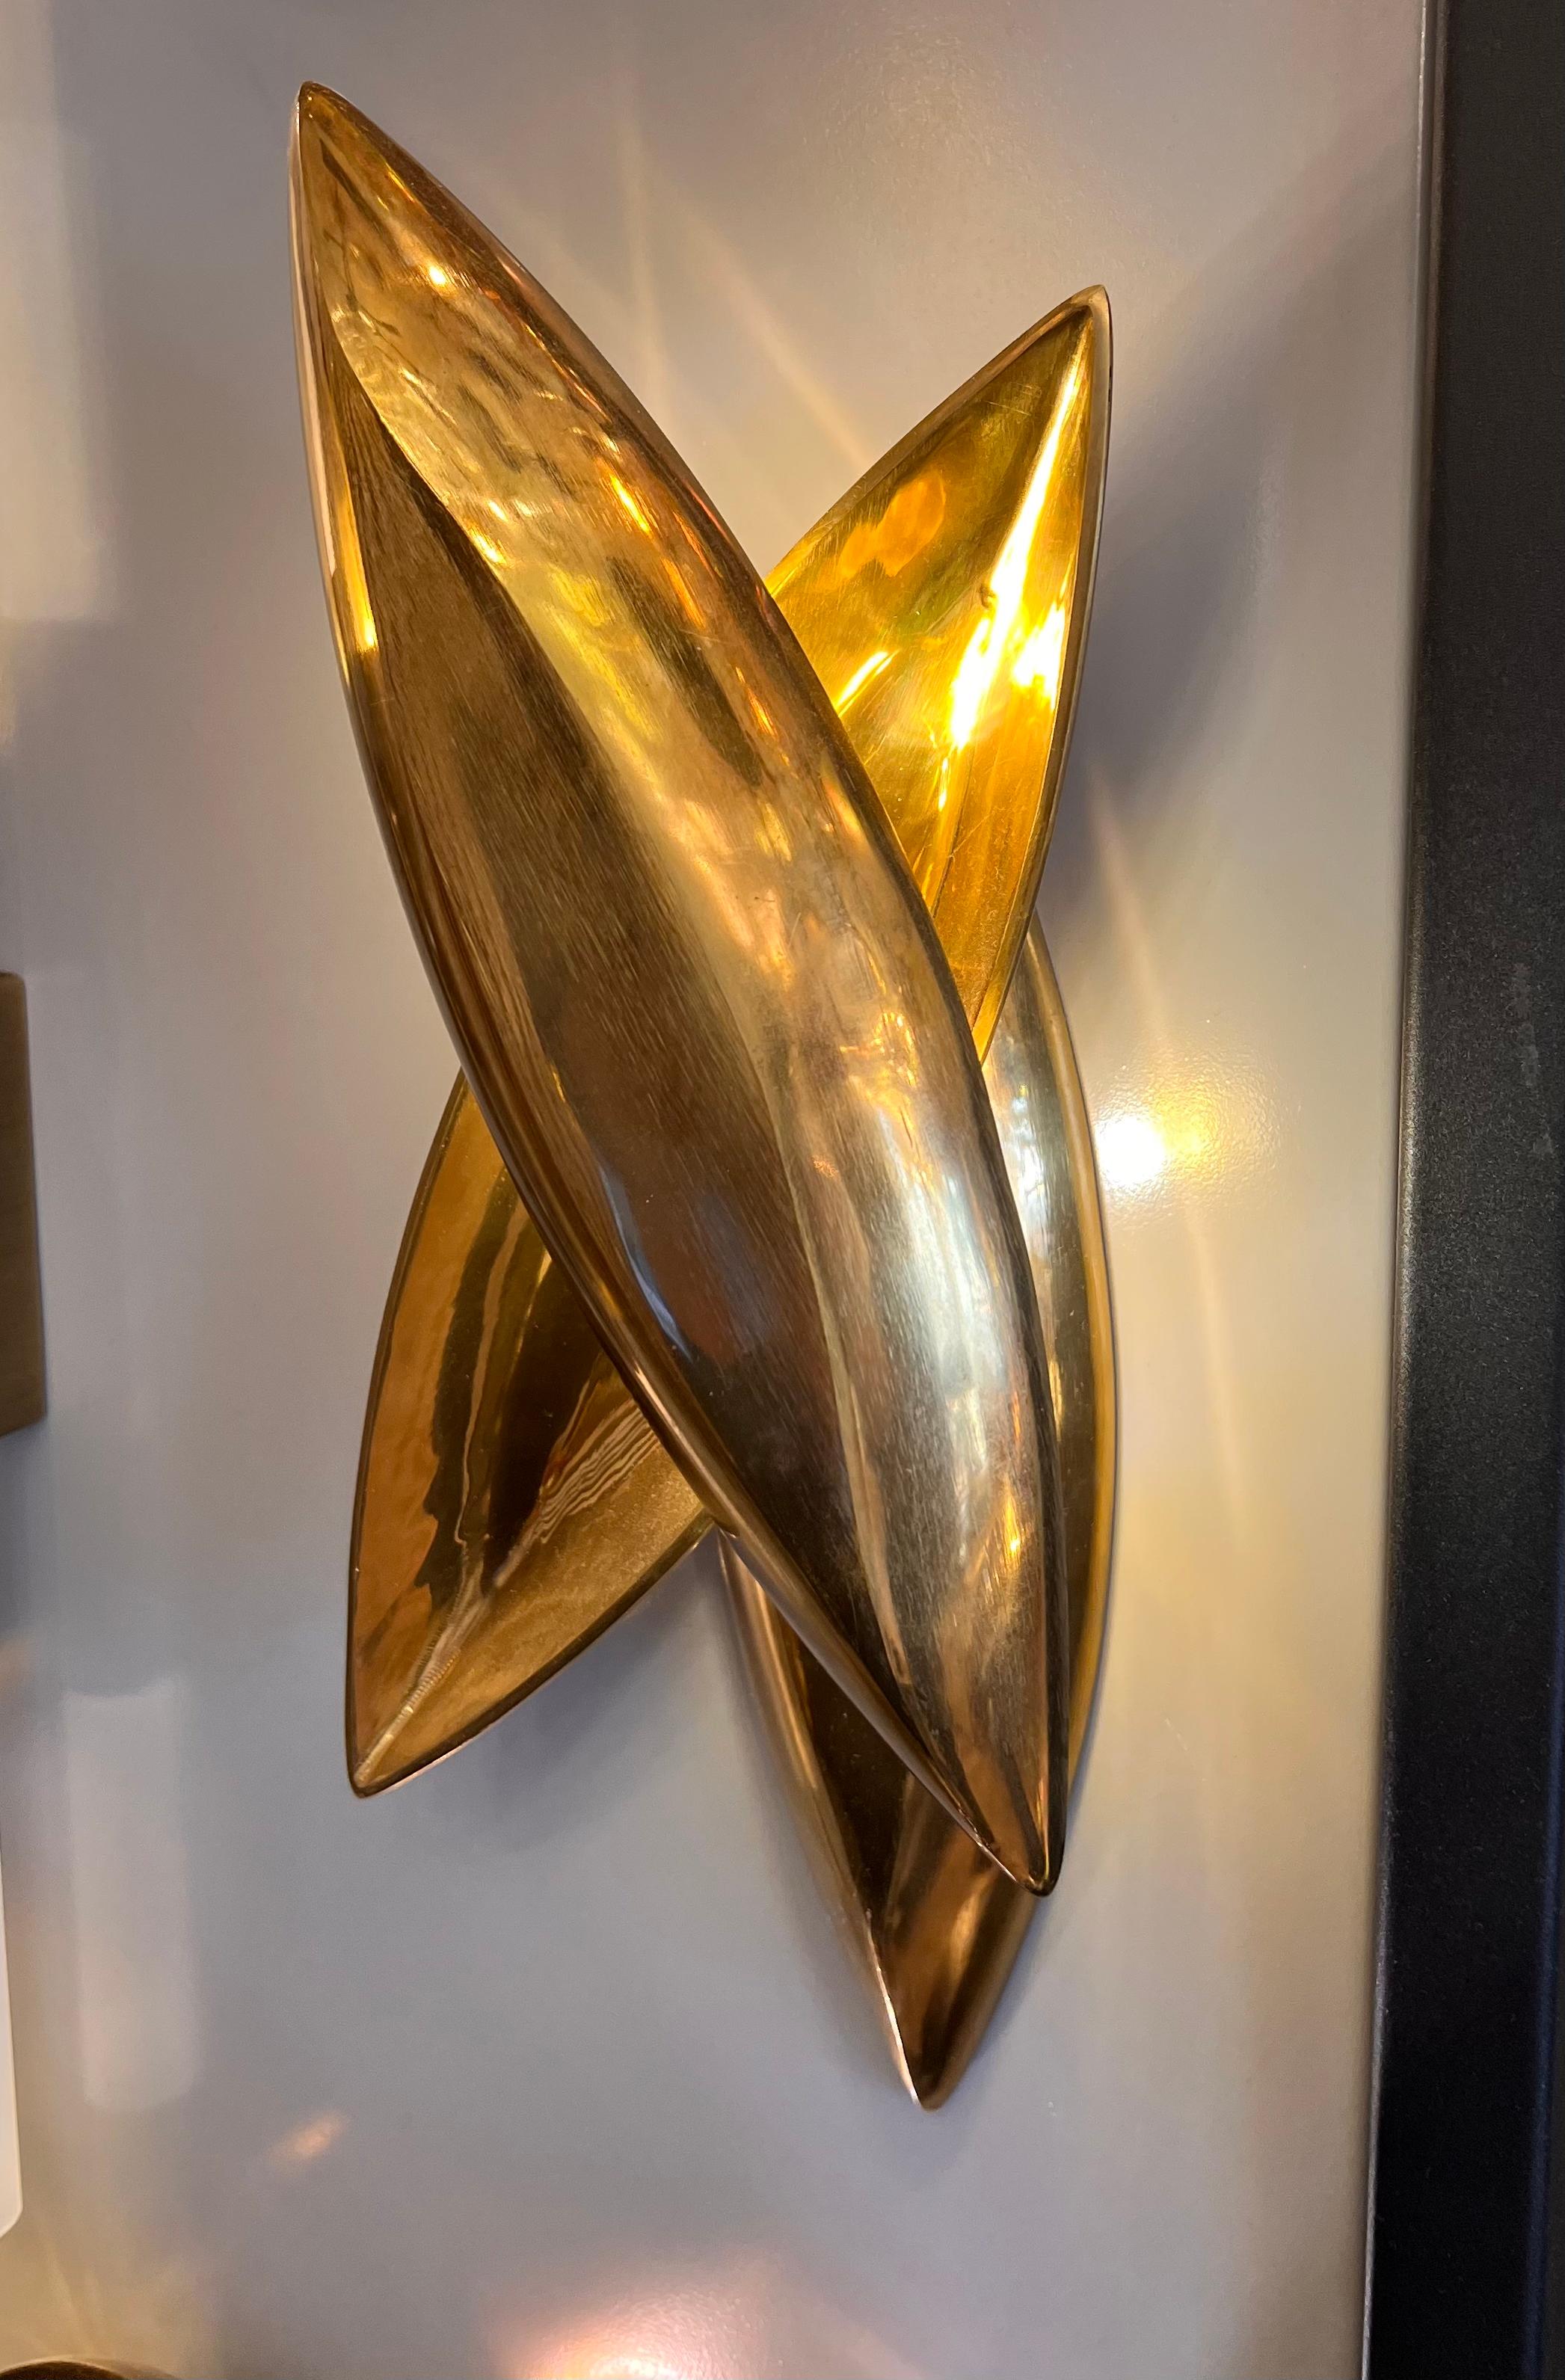 SEED wall sconce is a stunning piece of lighting that is crafted from three pieces of brass casting, inspired by the organic form of a seed. The overall design is a beautiful representation of nature and features intricate details that are both